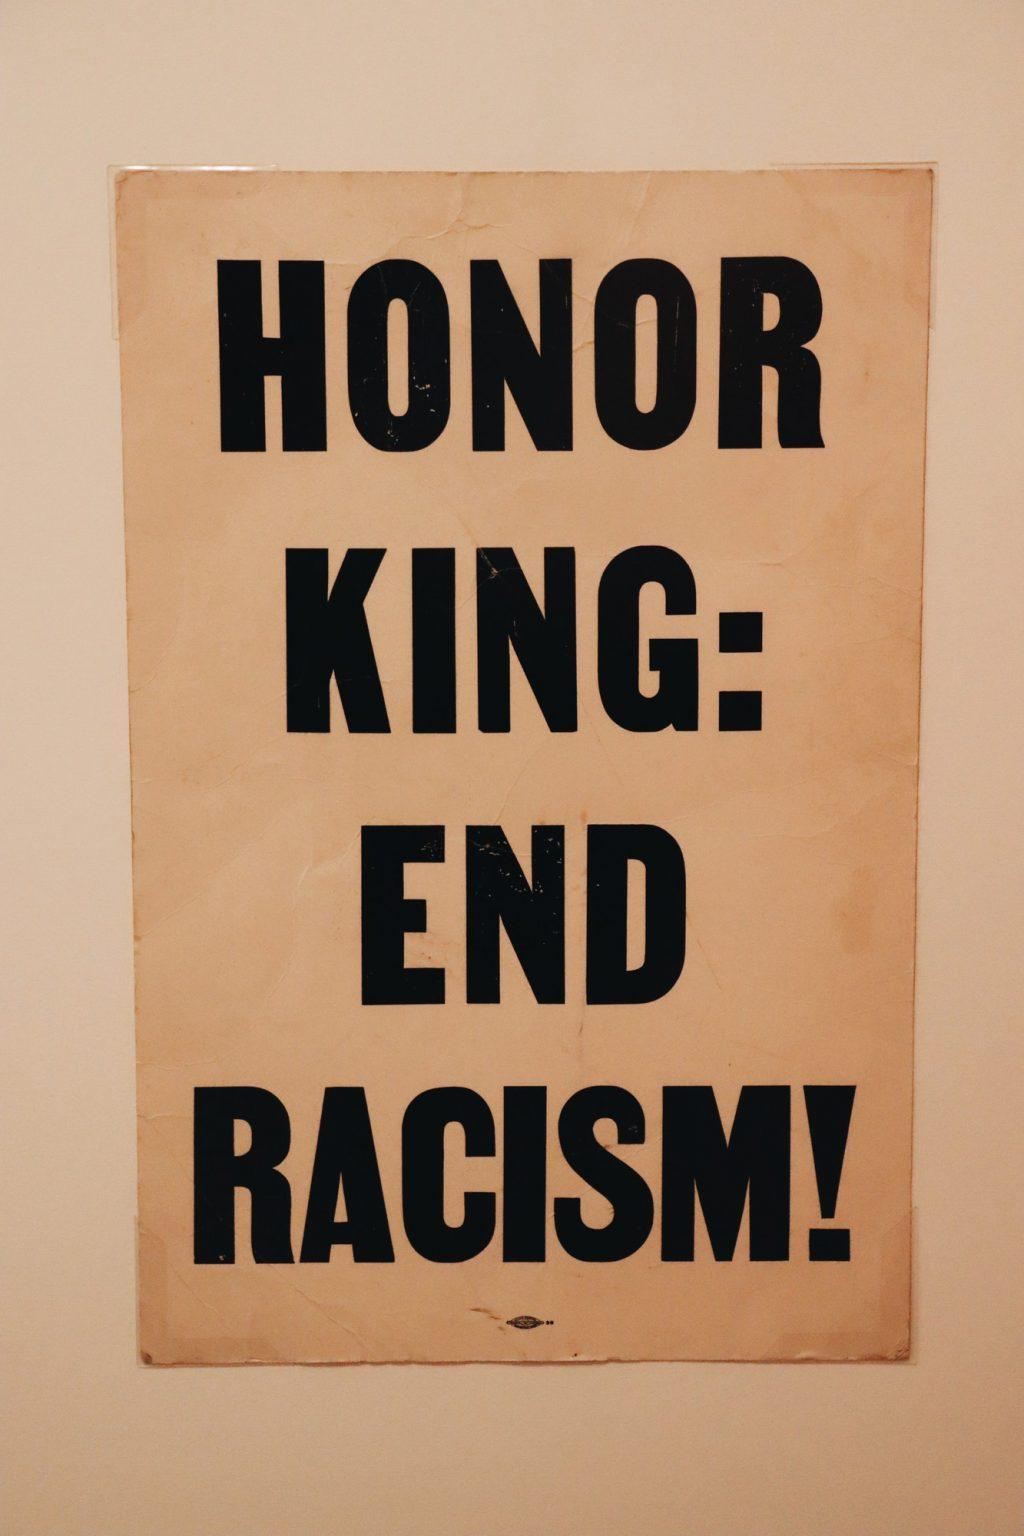 Once held up and creased in protest during the Civil Rights Movement, this sign provides a personal touch to the collection. Attendees at the museum said the many documents and artifacts on display brought this historically impactful period to life.